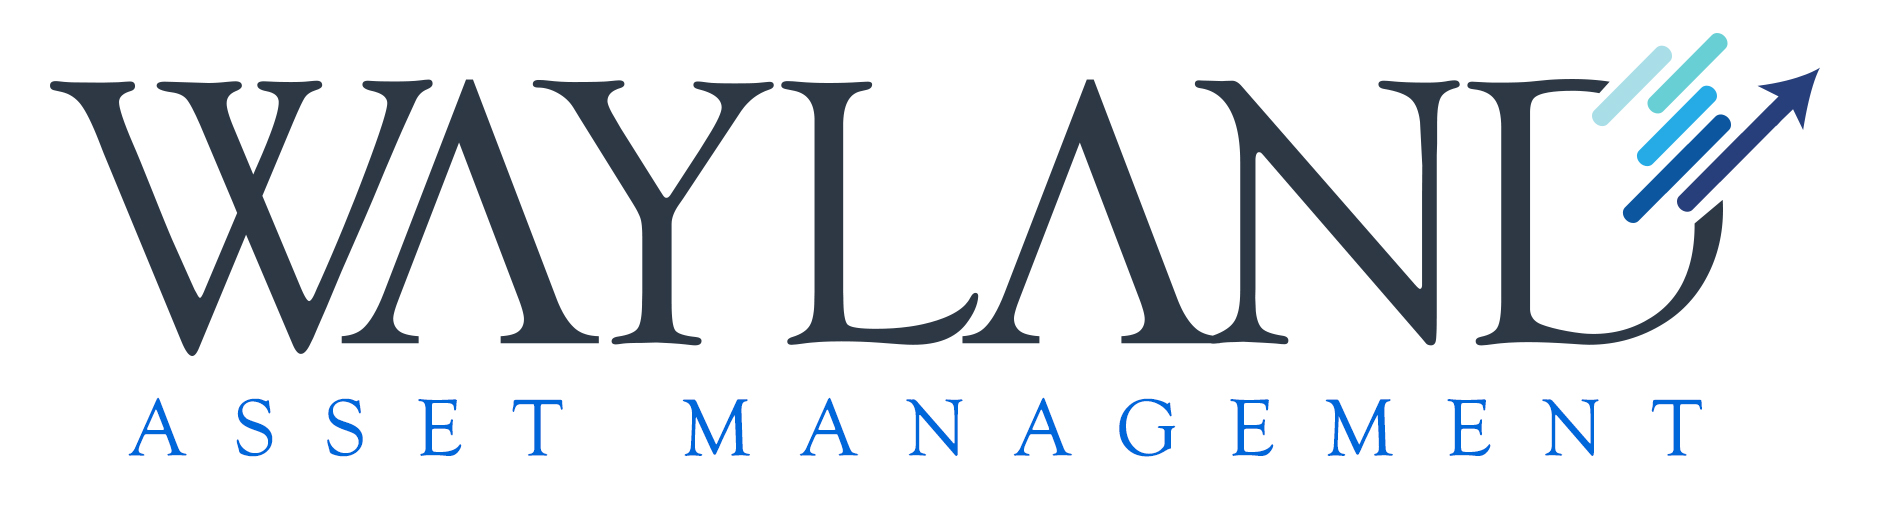 Wayland Asset Management and progression in 2022